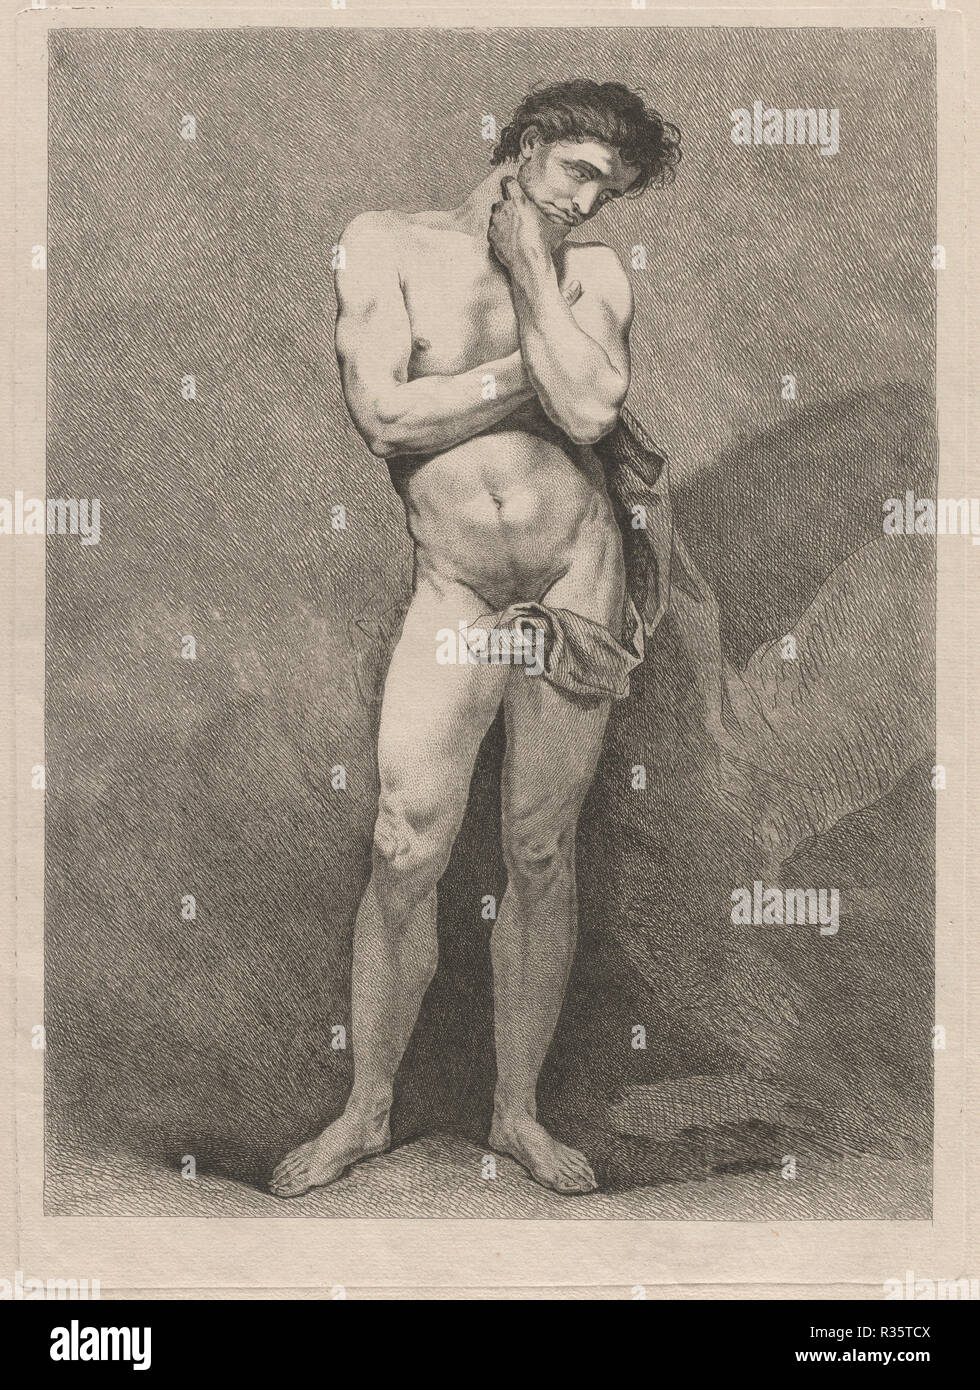 Standing Man in Pensive Pose. Dated: c. 1743. Dimensions: plate: 49.6 × 34.5 cm (19 1/2 × 13 9/16 in.)  plate: 39.4 × 29 cm (15 1/2 × 11 7/16 in.). Medium: etching on laid paper. Museum: National Gallery of Art, Washington DC. Author: Carle Van Loo. Carle (Charles André) Vanloo. Stock Photo